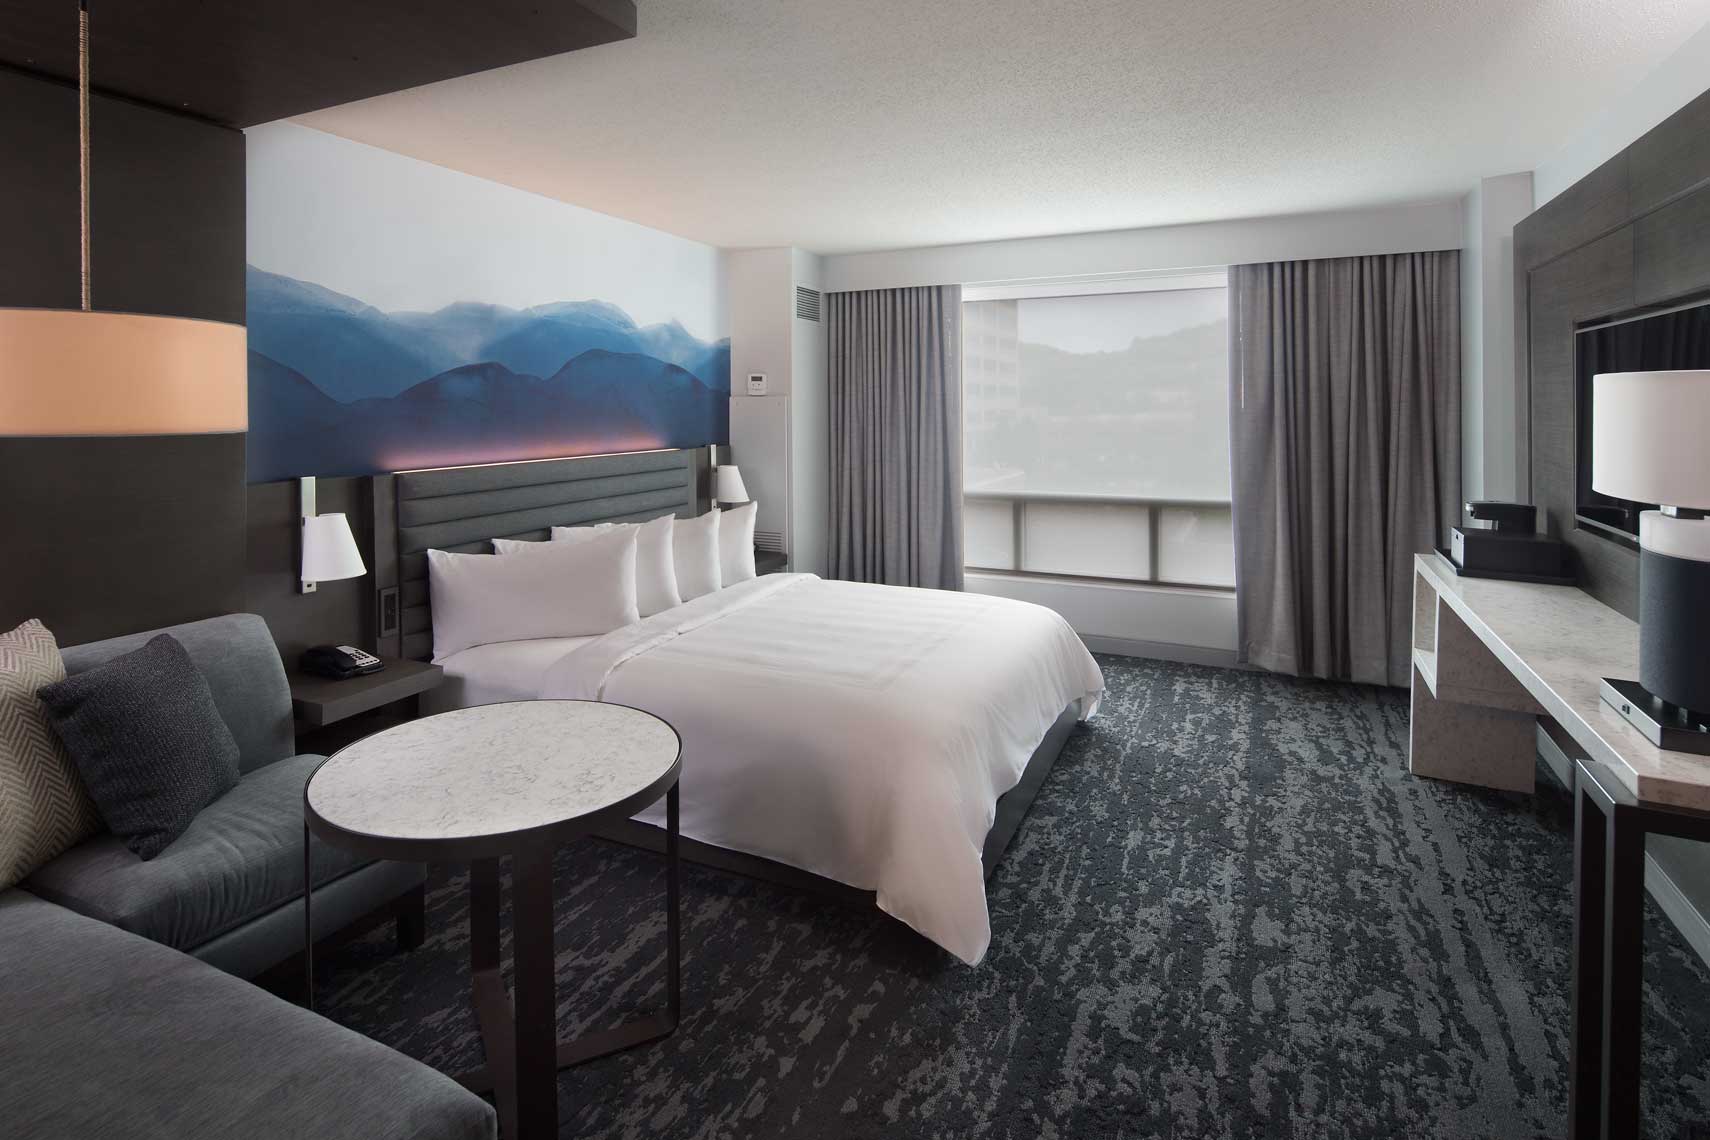 A view of a comfortable guest room at the Franklin Marriott Cool Springs